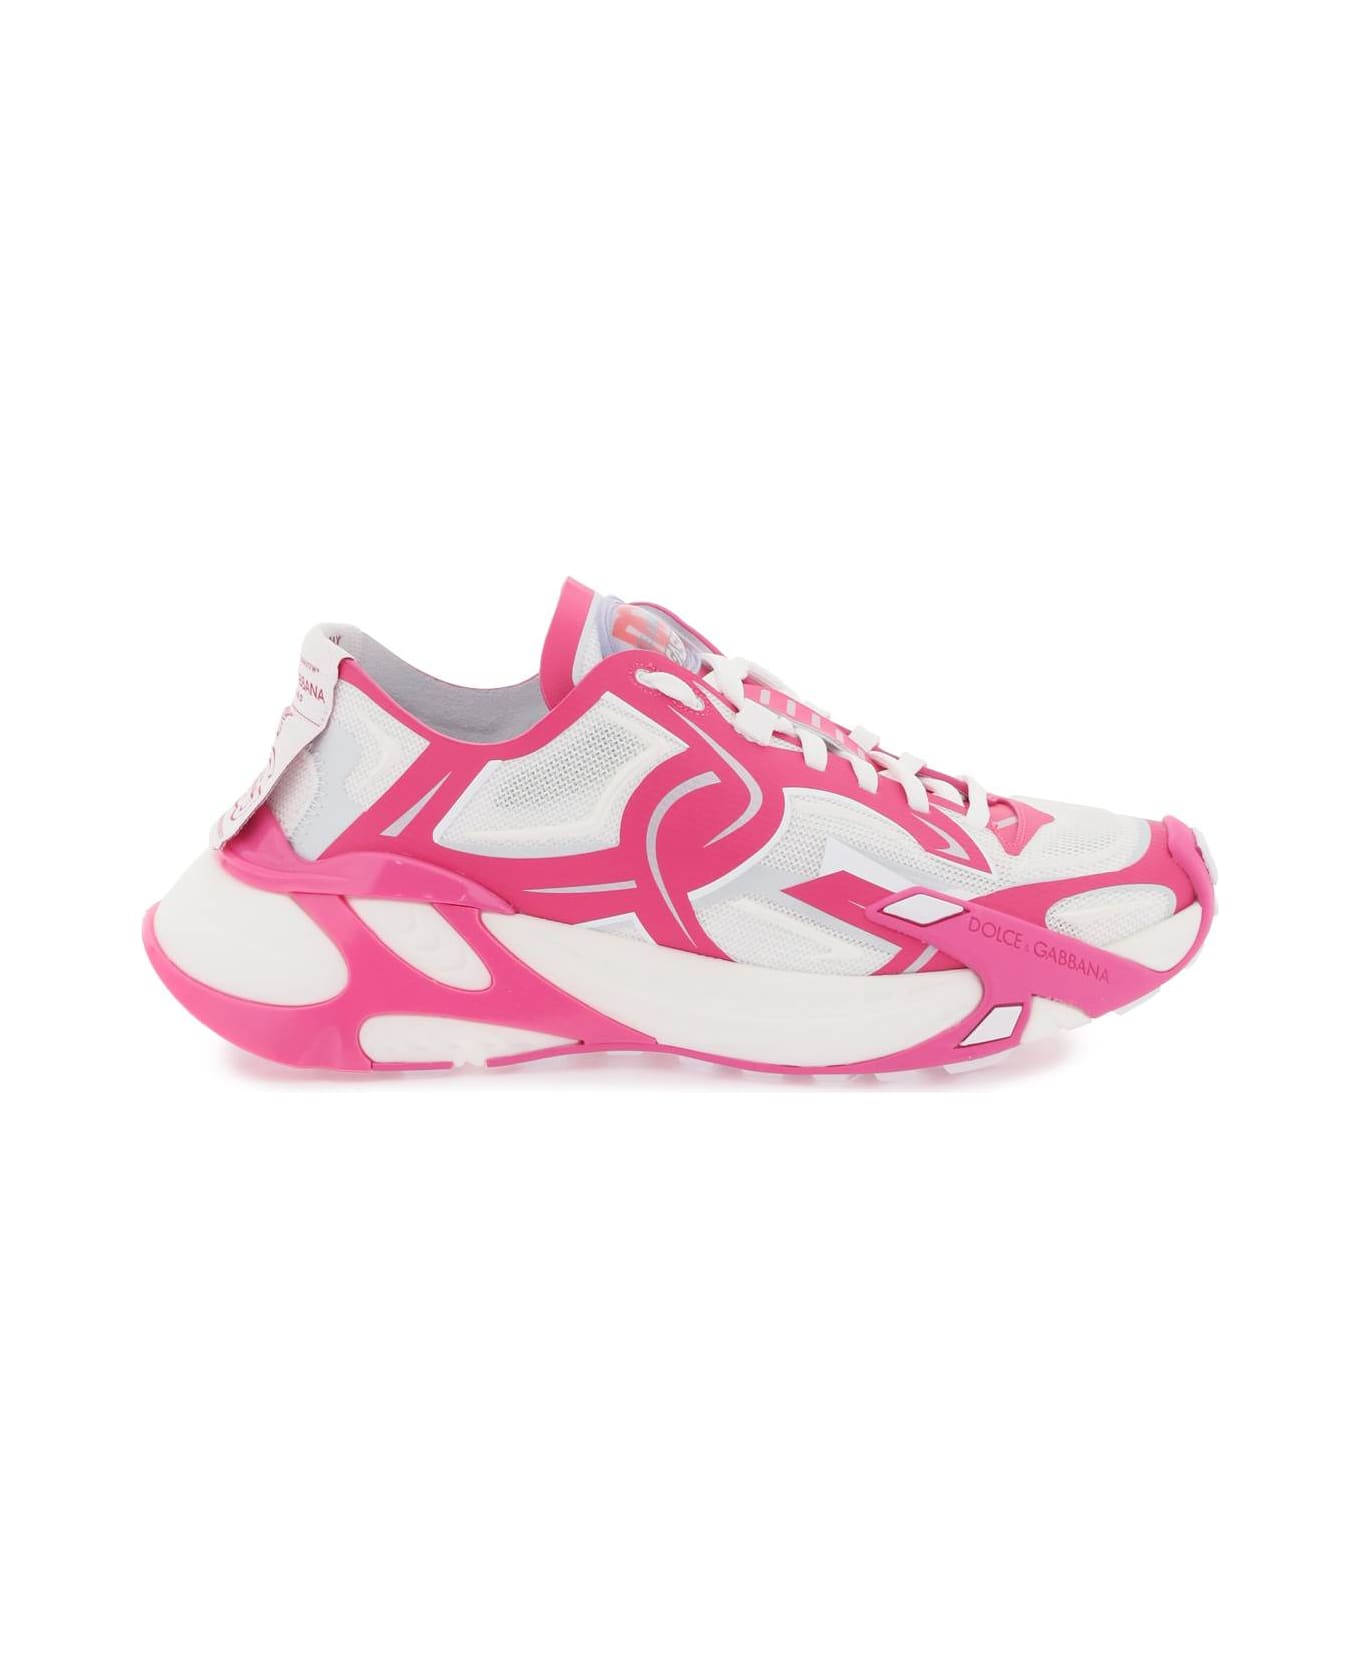 Dolce & Gabbana 'fast' Sneakers - WHITE/PINK